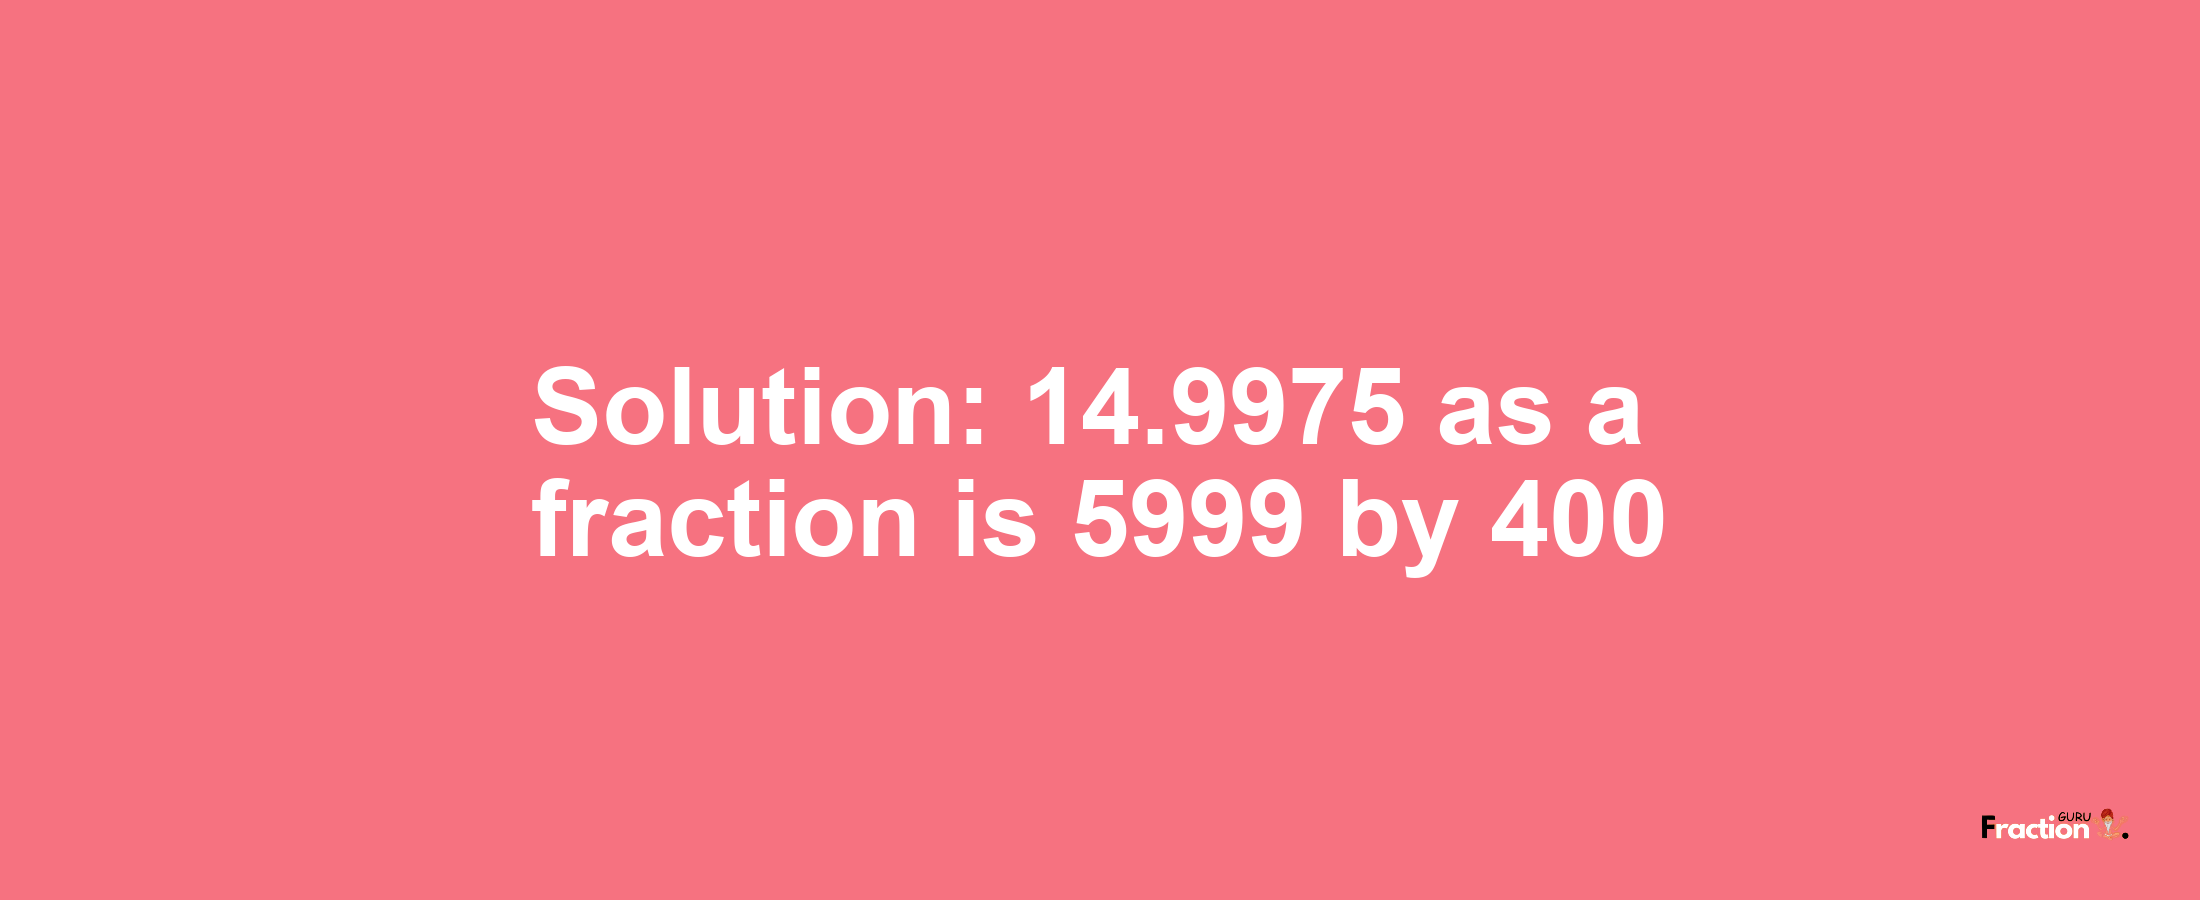 Solution:14.9975 as a fraction is 5999/400